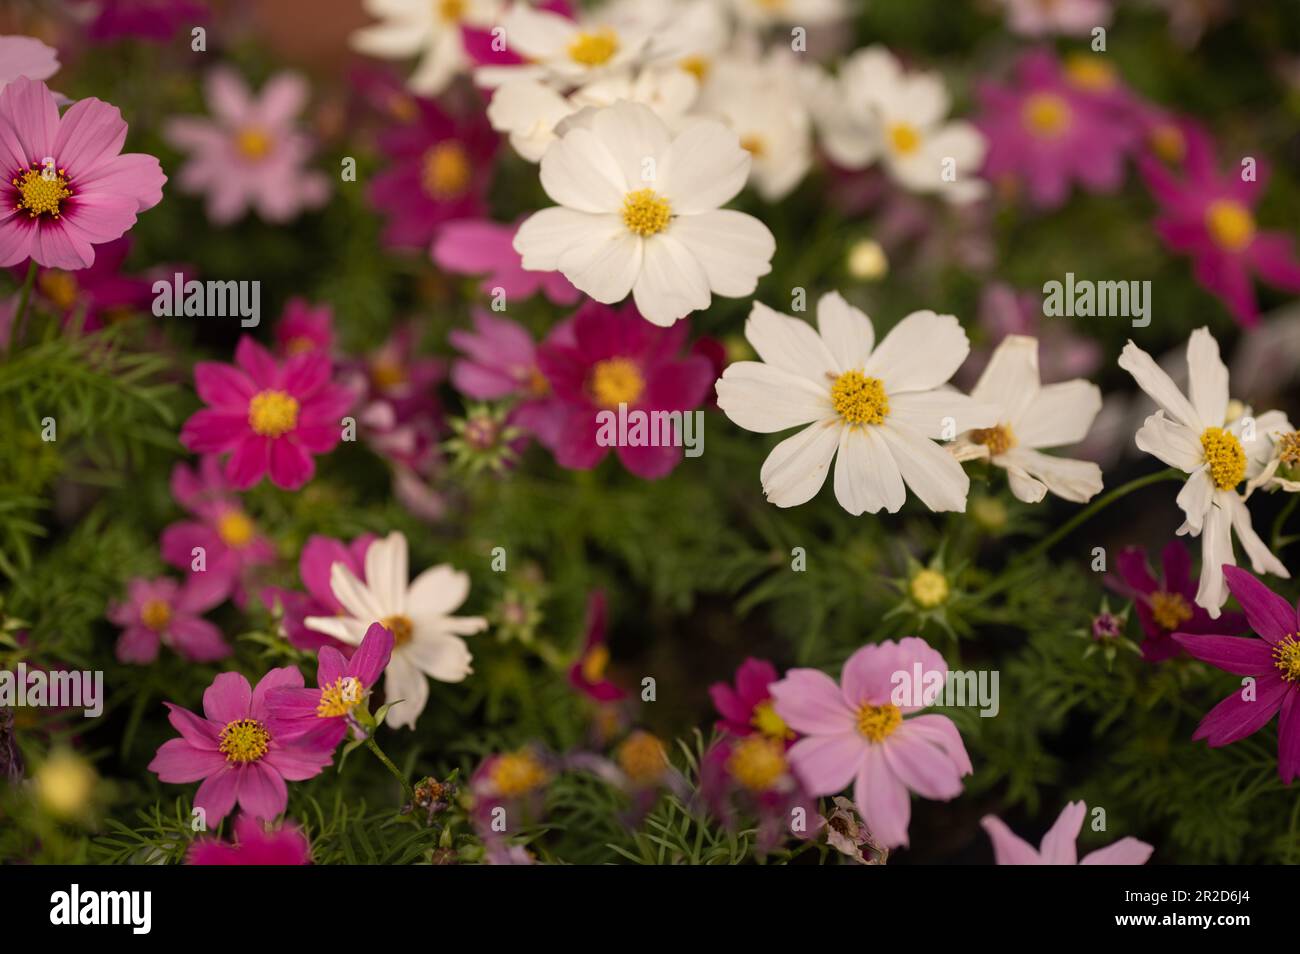 Colorful Cosmos Drawf Flowers Blooming in Garden Stock Photo